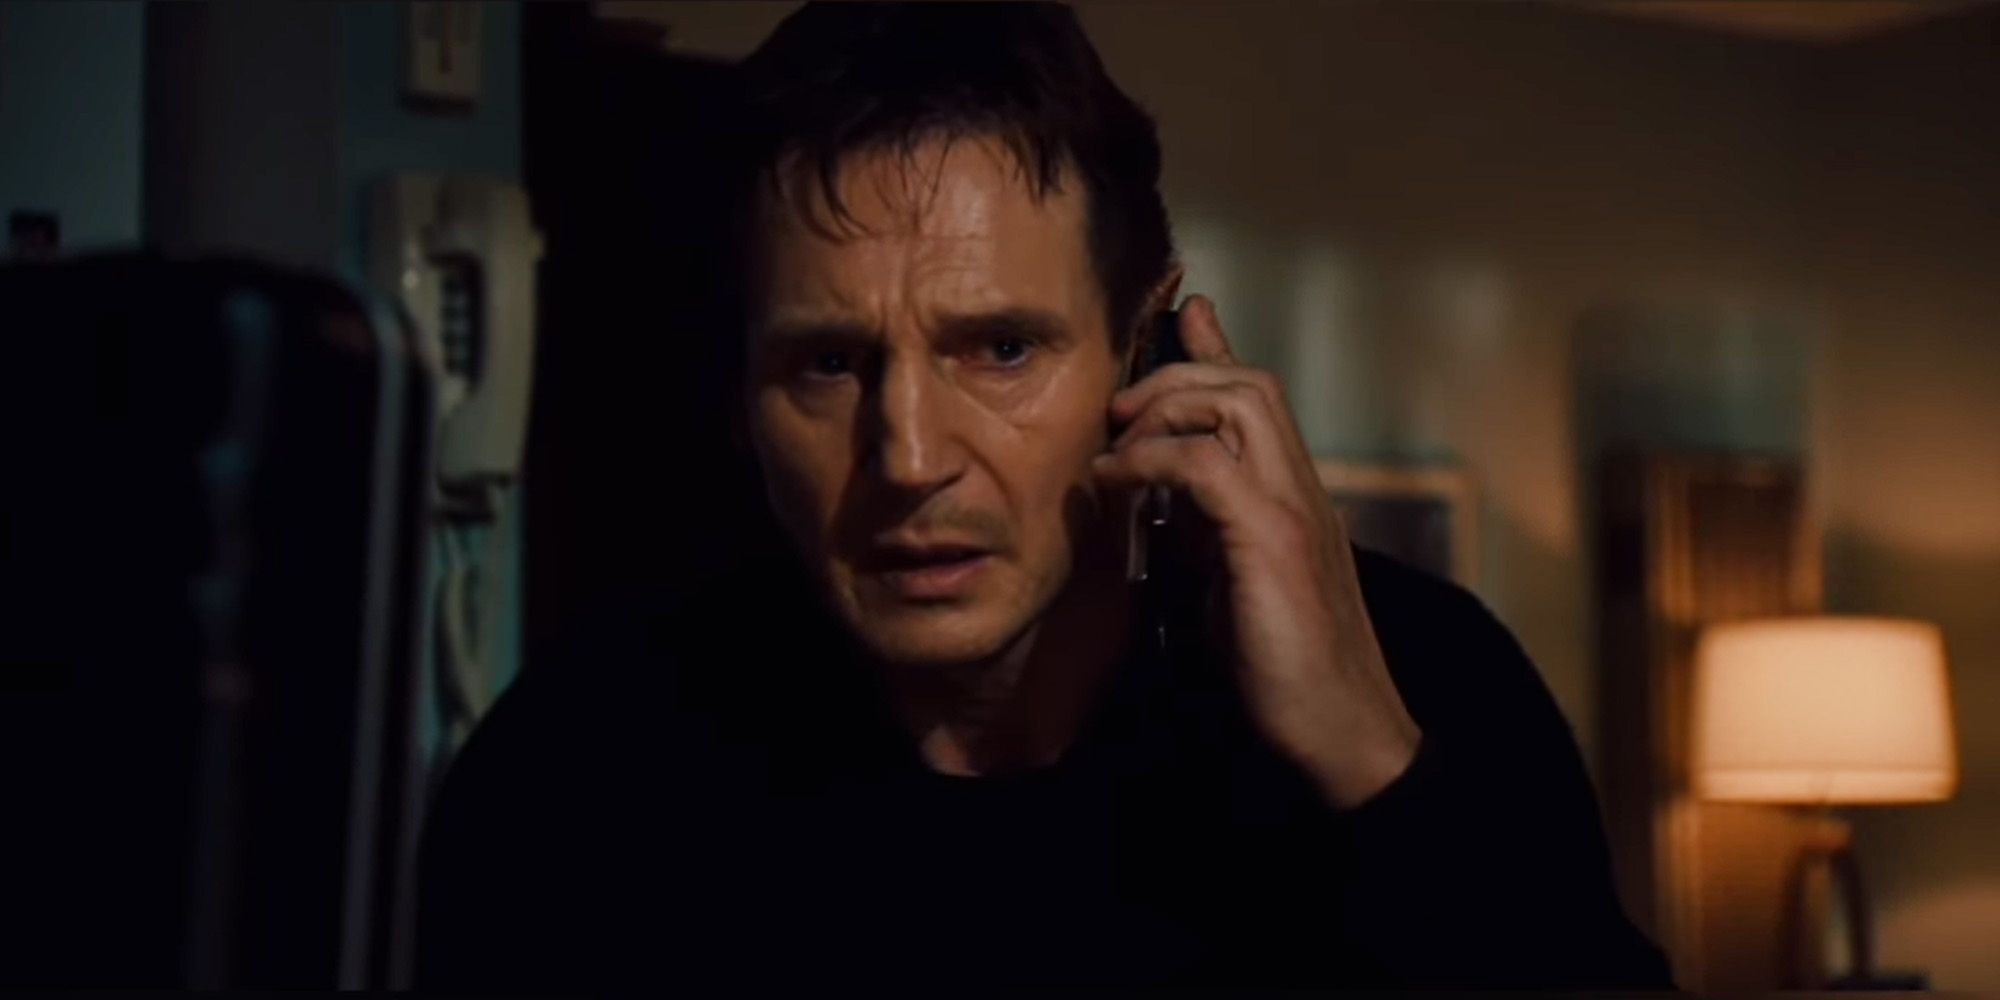 Liam Neeson as Bryan Mills on the phone in Taken